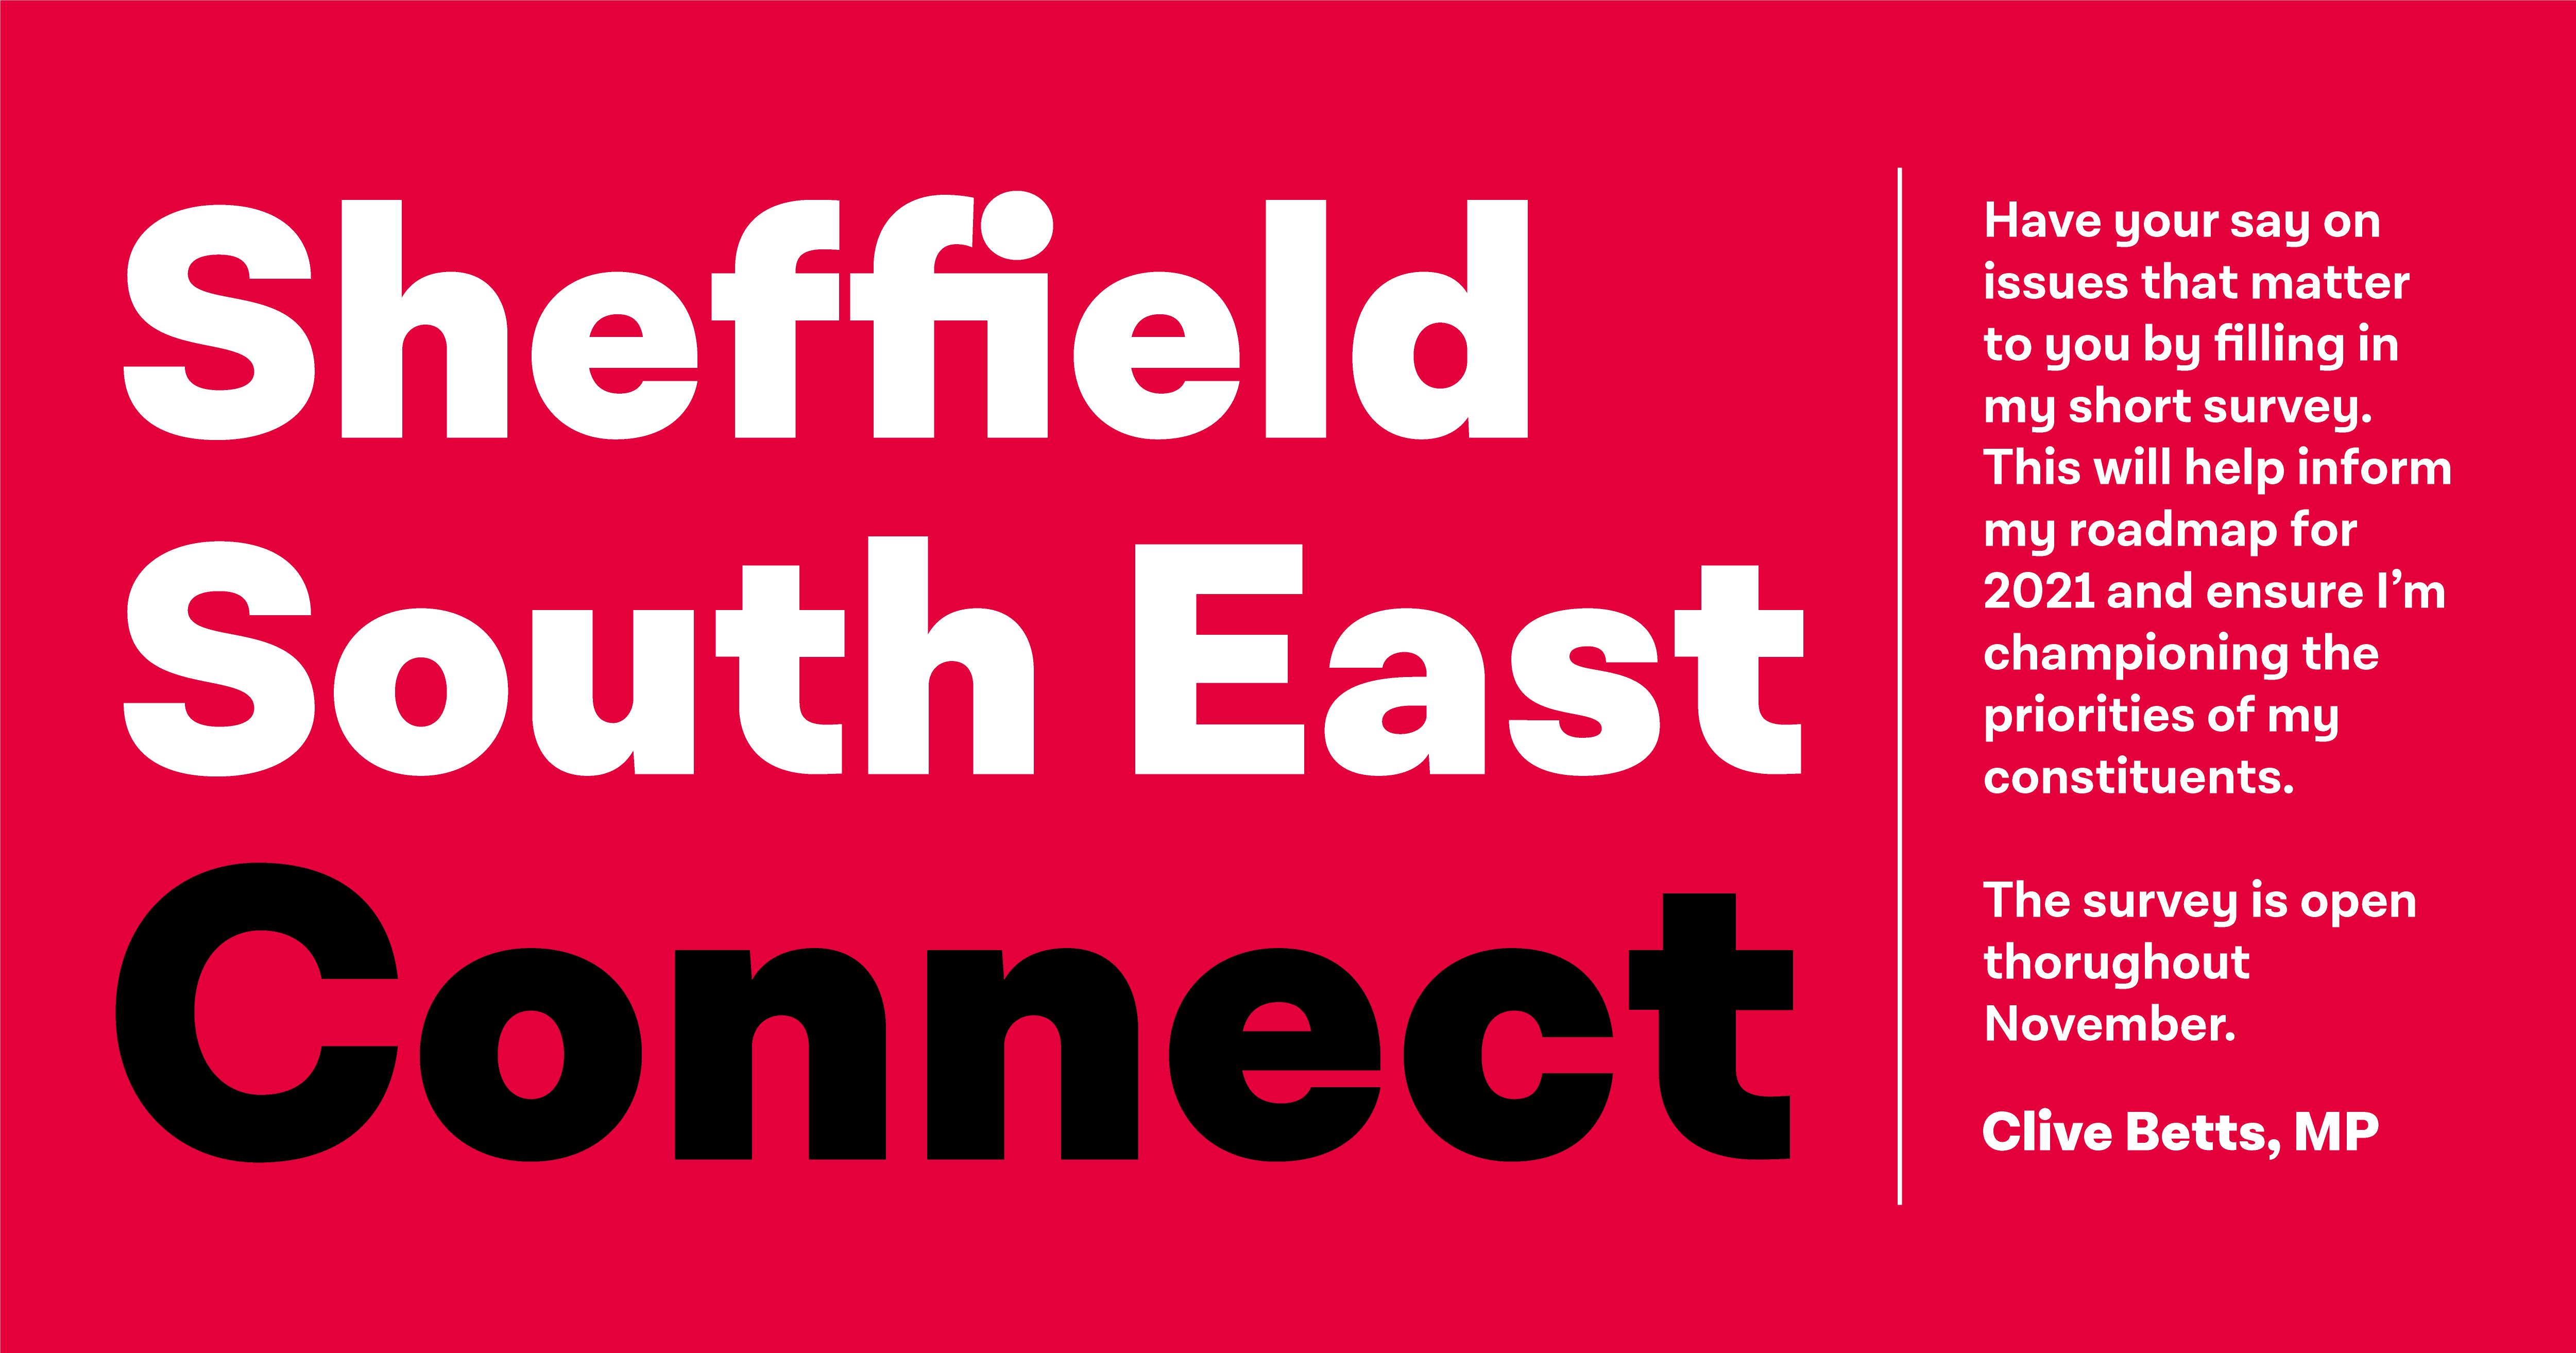 Sheffield South East Connects